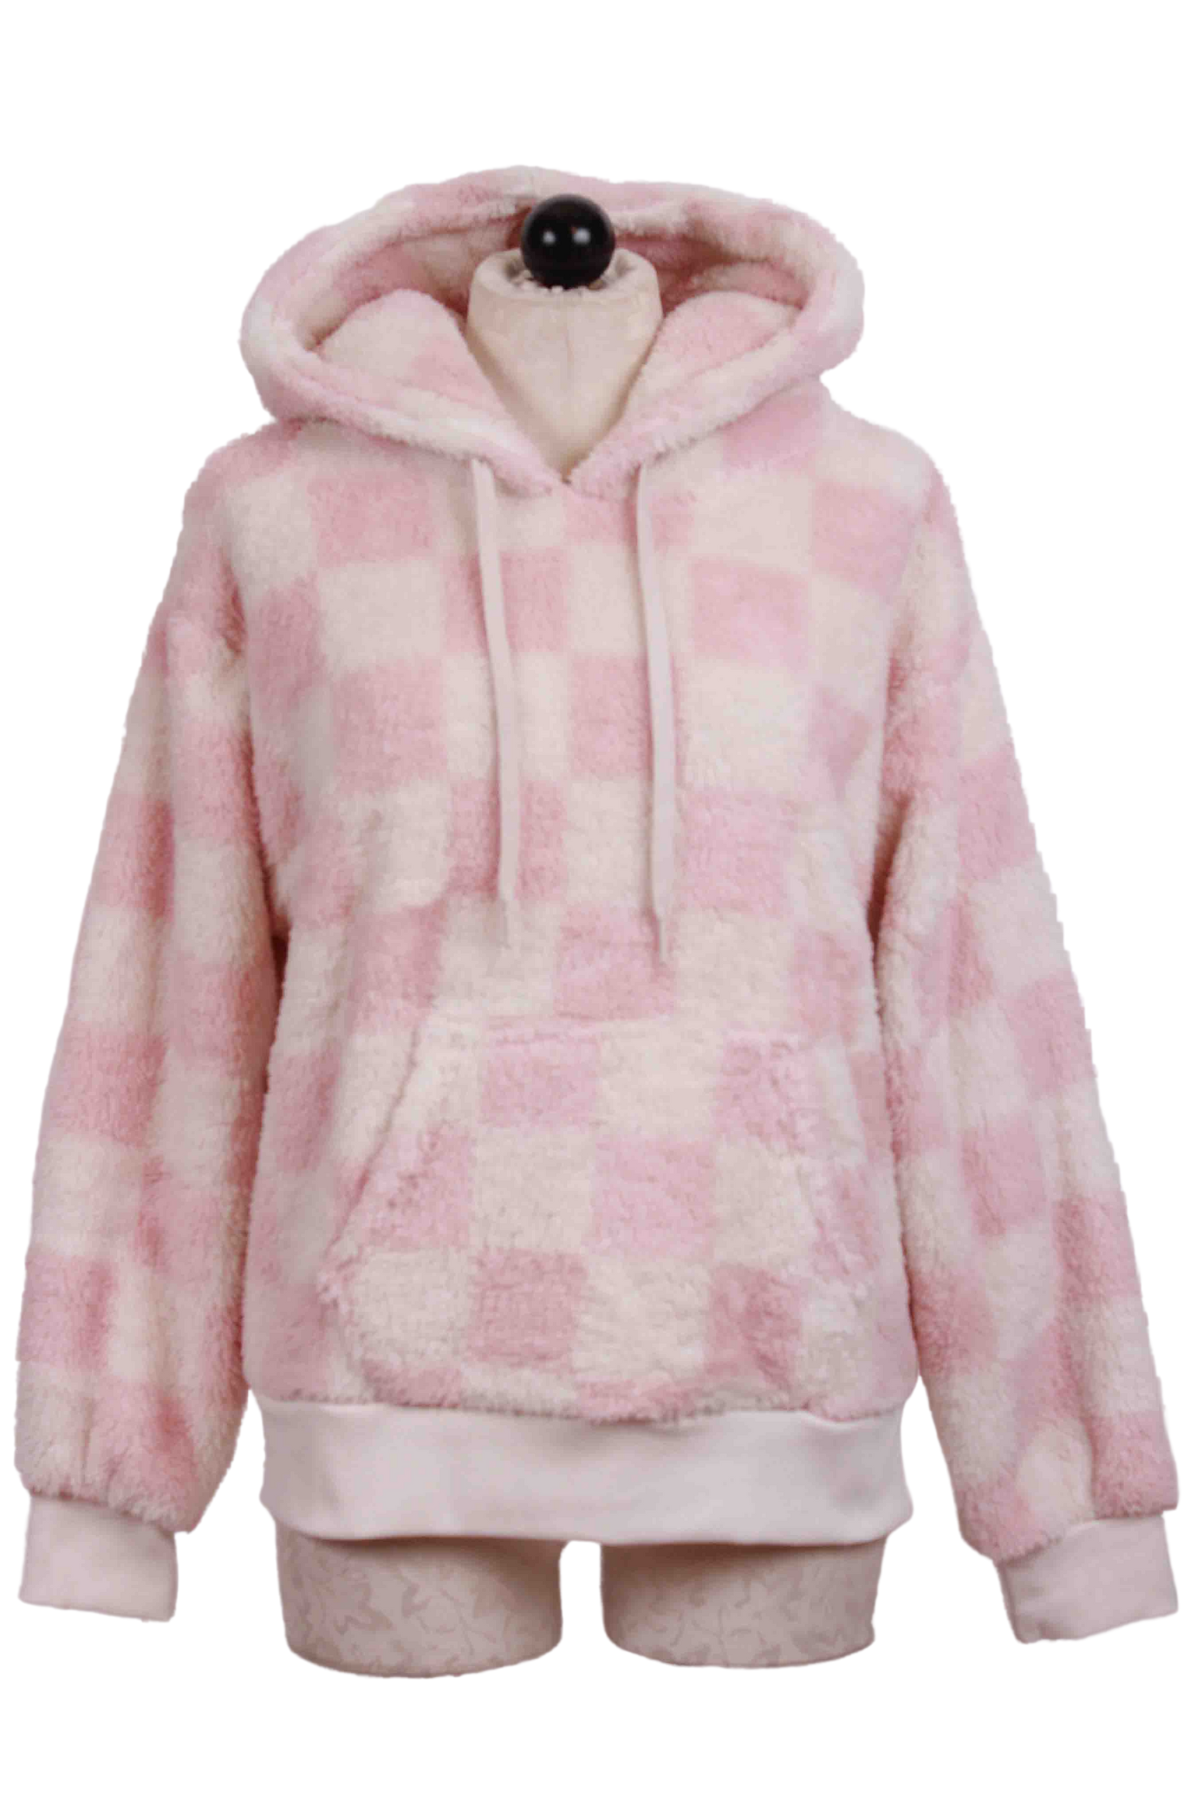 Pink and Clay Checked Lets Cozy Fuzzy Hoodie by PJ Salvage